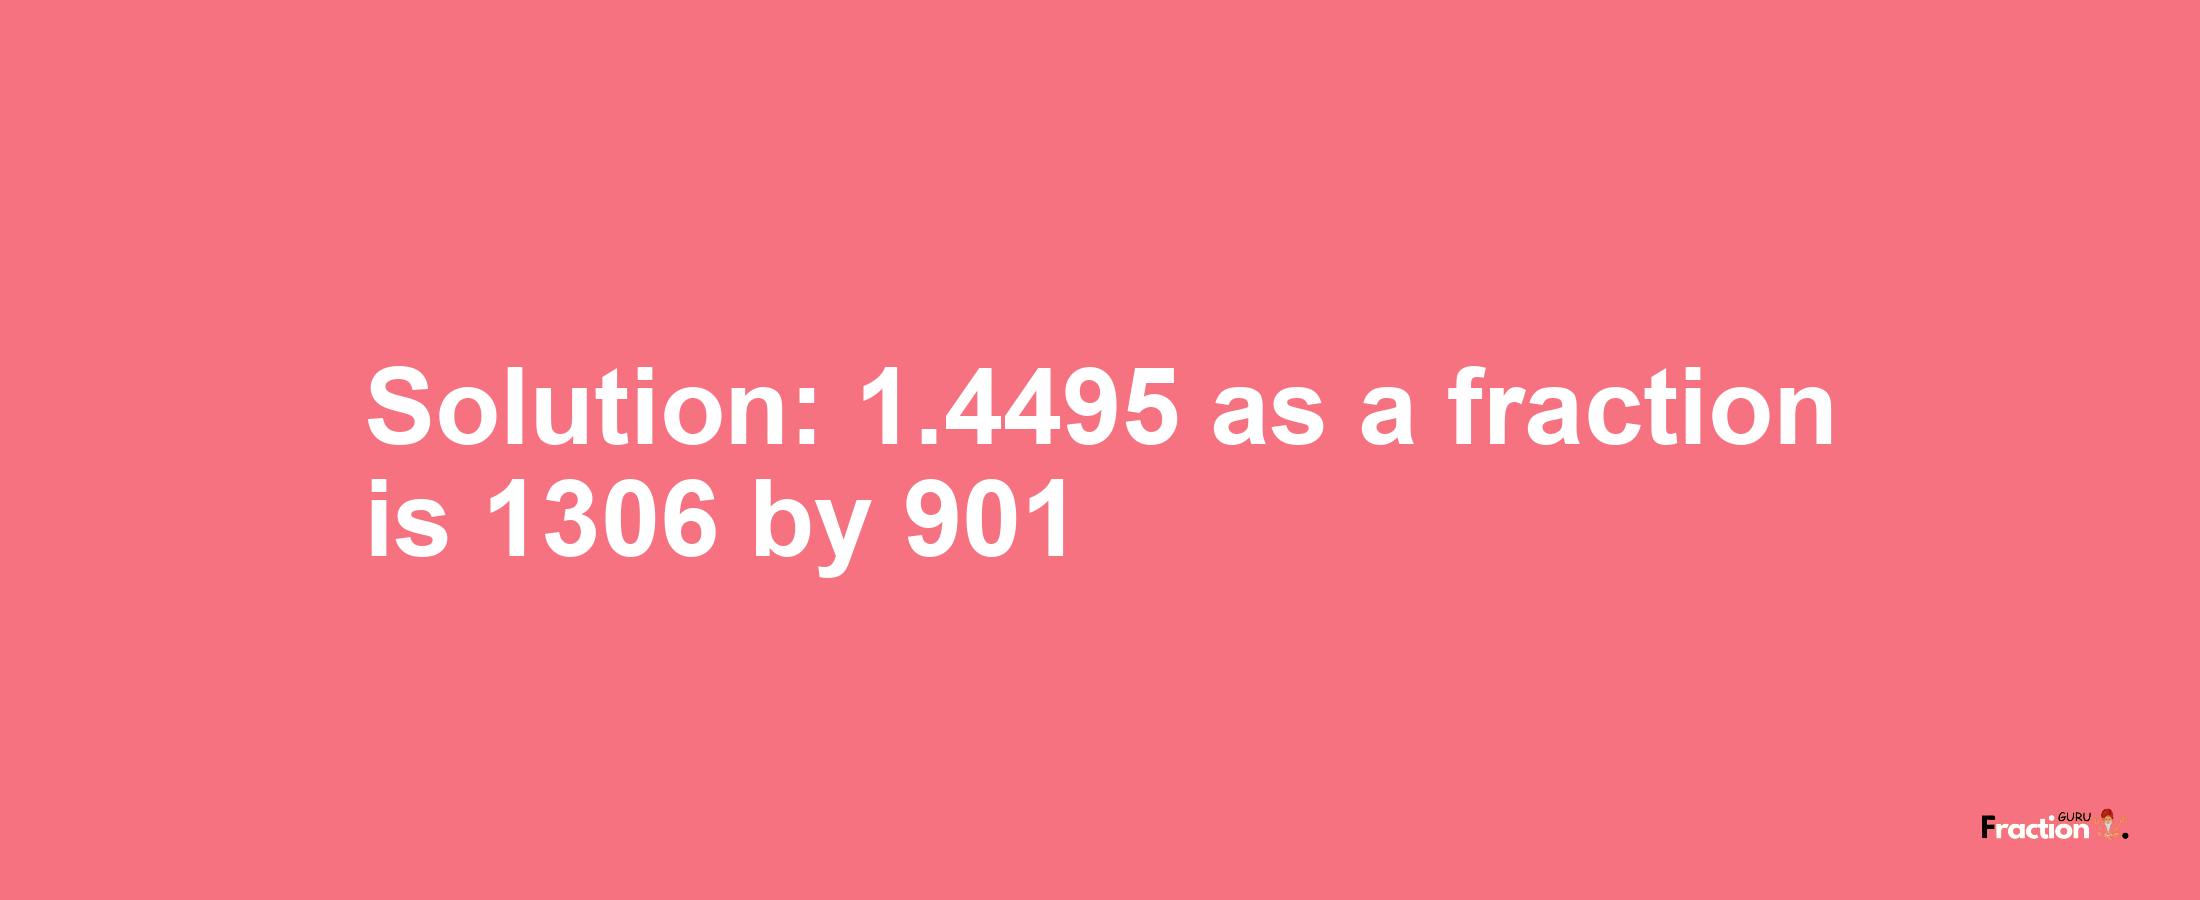 Solution:1.4495 as a fraction is 1306/901